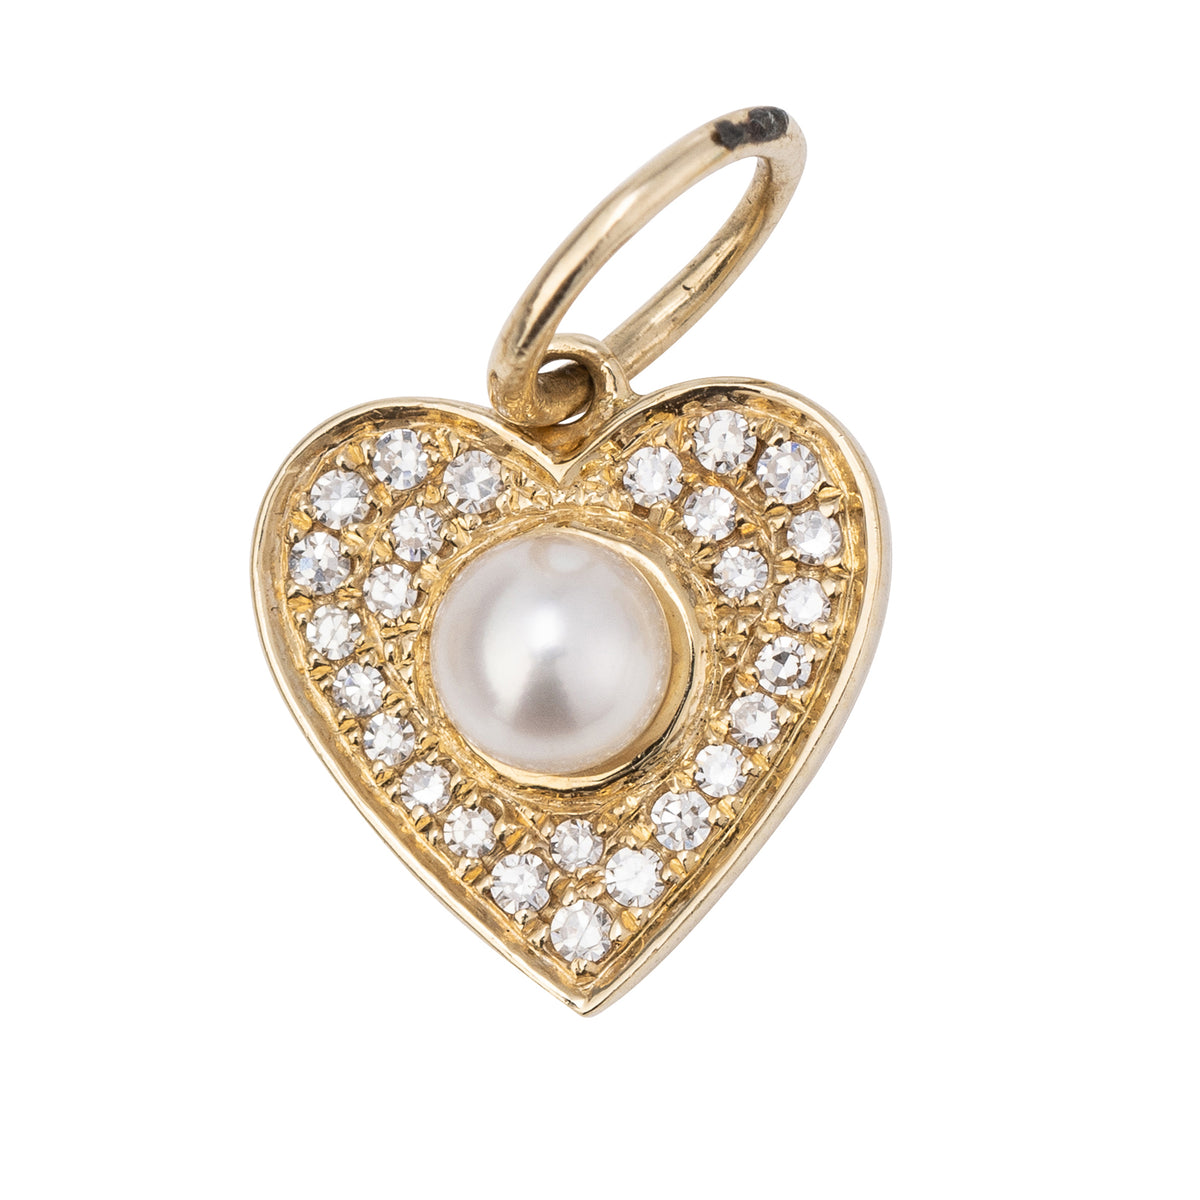 Petite Pave Heart Charm with Pearl Center